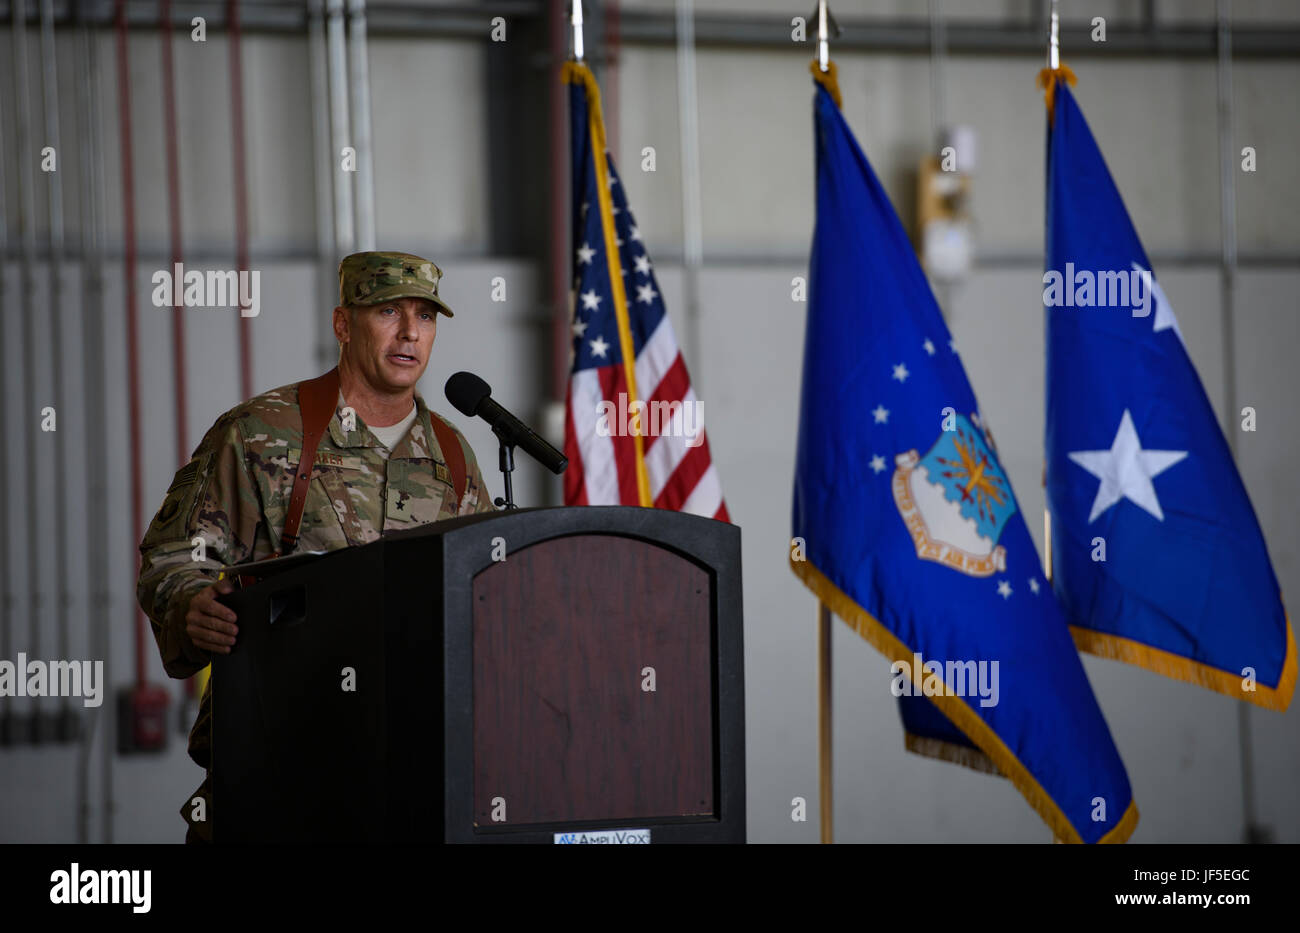 Brig. Gen. Craig Baker, the 455th Air Expeditionary Wing commander, speaks to 455th AEW Airmen and distinguished guests during a change of command ceremony at Bagram Airfield, Afghanistan, June 3, 2017. As the commander of the 455th AEW, Baker will lead the premier counterterrorism air mission in Afghanistan. The wing’s operations enable the NATO Resolute Support mission to successfully train, advise, and assist the military and security forces of Afghanistan, while restricting and deterring the terrorist threat in the region. (U.S. Air Force photo by Staff Sgt. Benjamin Gonsier) Stock Photo